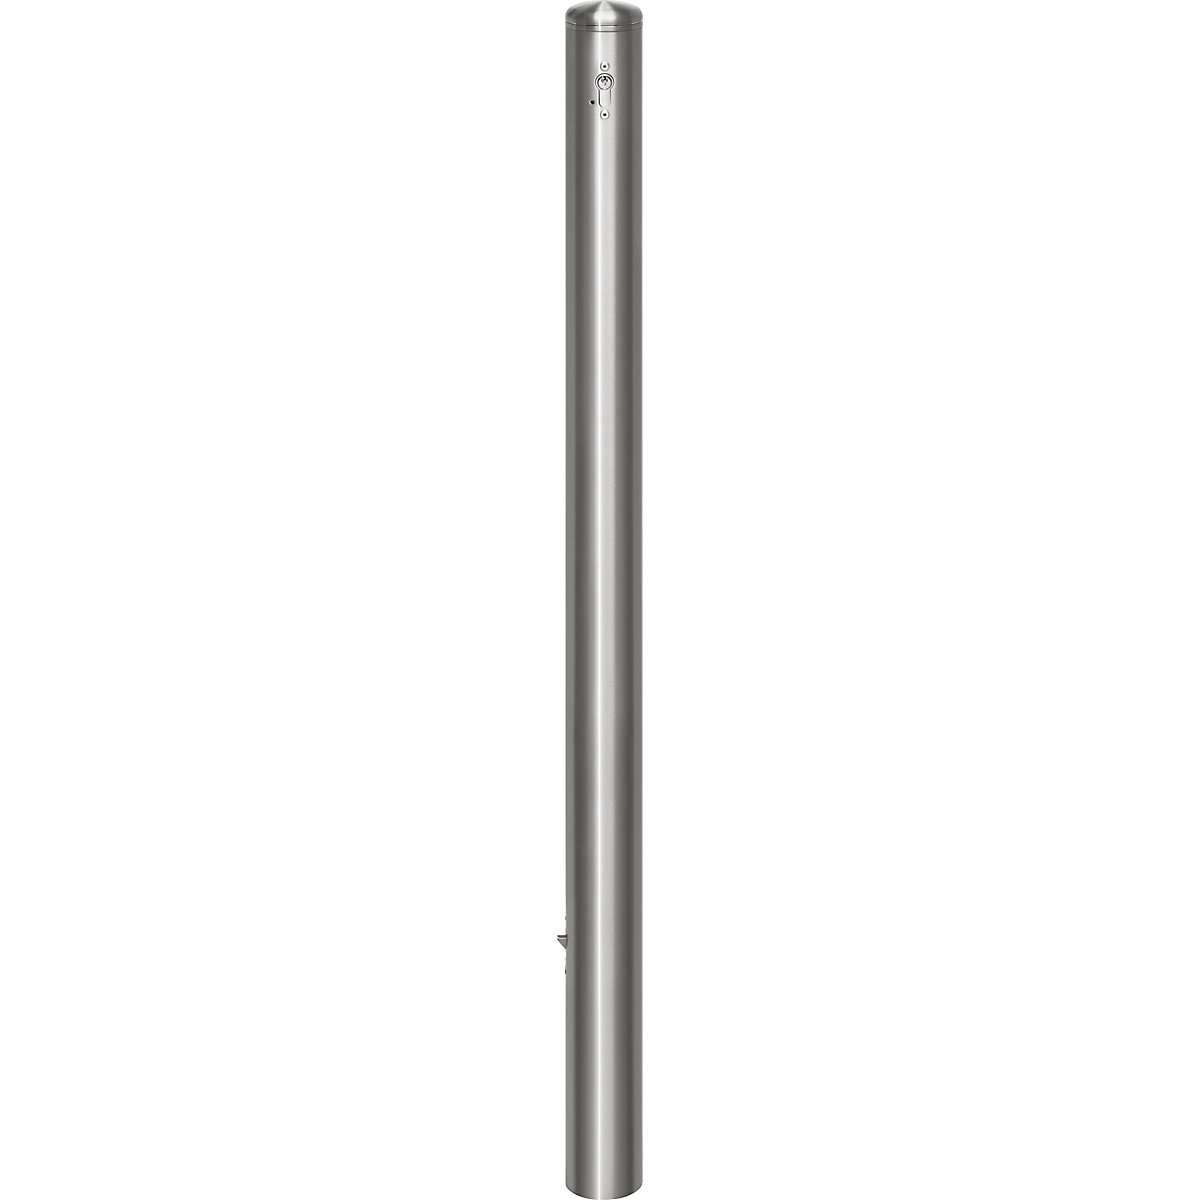 Stainless steel barrier post, with end cap, ground sleeve for concreting in, Ø 76 mm, profile cylinder-12